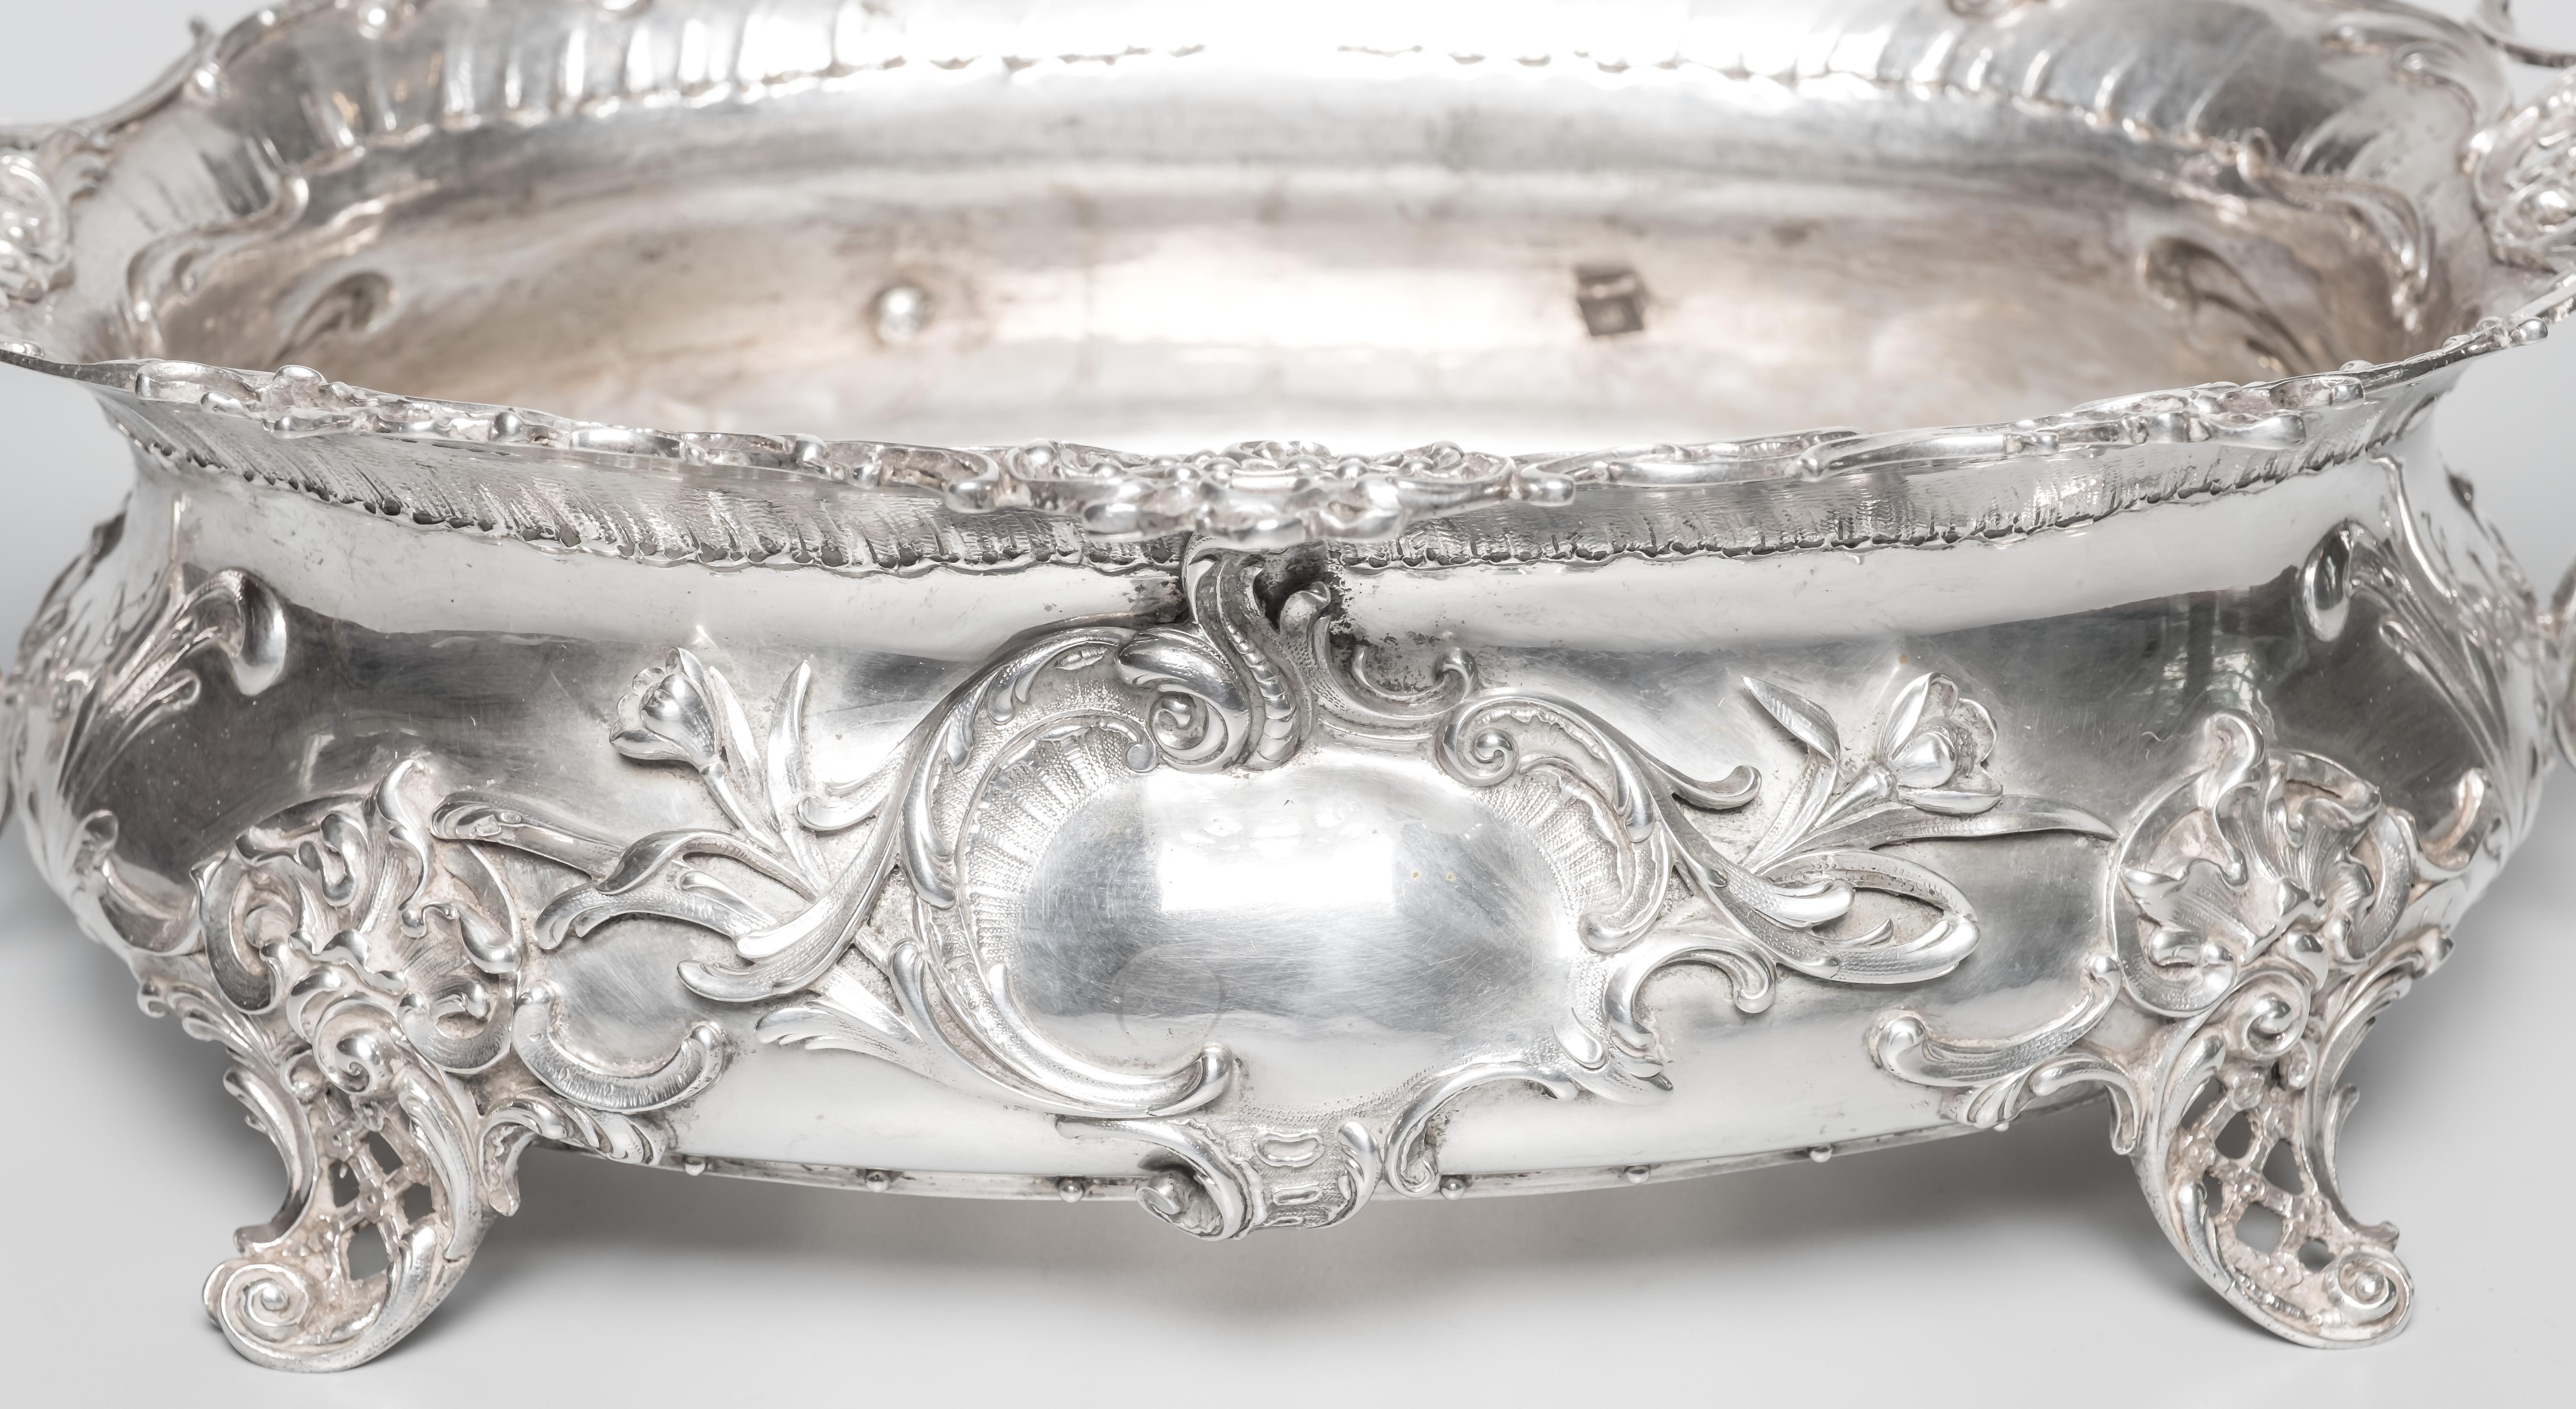 An Hungarian Baroque style silver plated mounted twin handled jardinière, the oval body with twin cast putti handles and raised on four scrolled feet,
Measures: W 30 cm, L 50 cm x H 20 cm (Approximate)

Shipping included 
Free and fast delivery